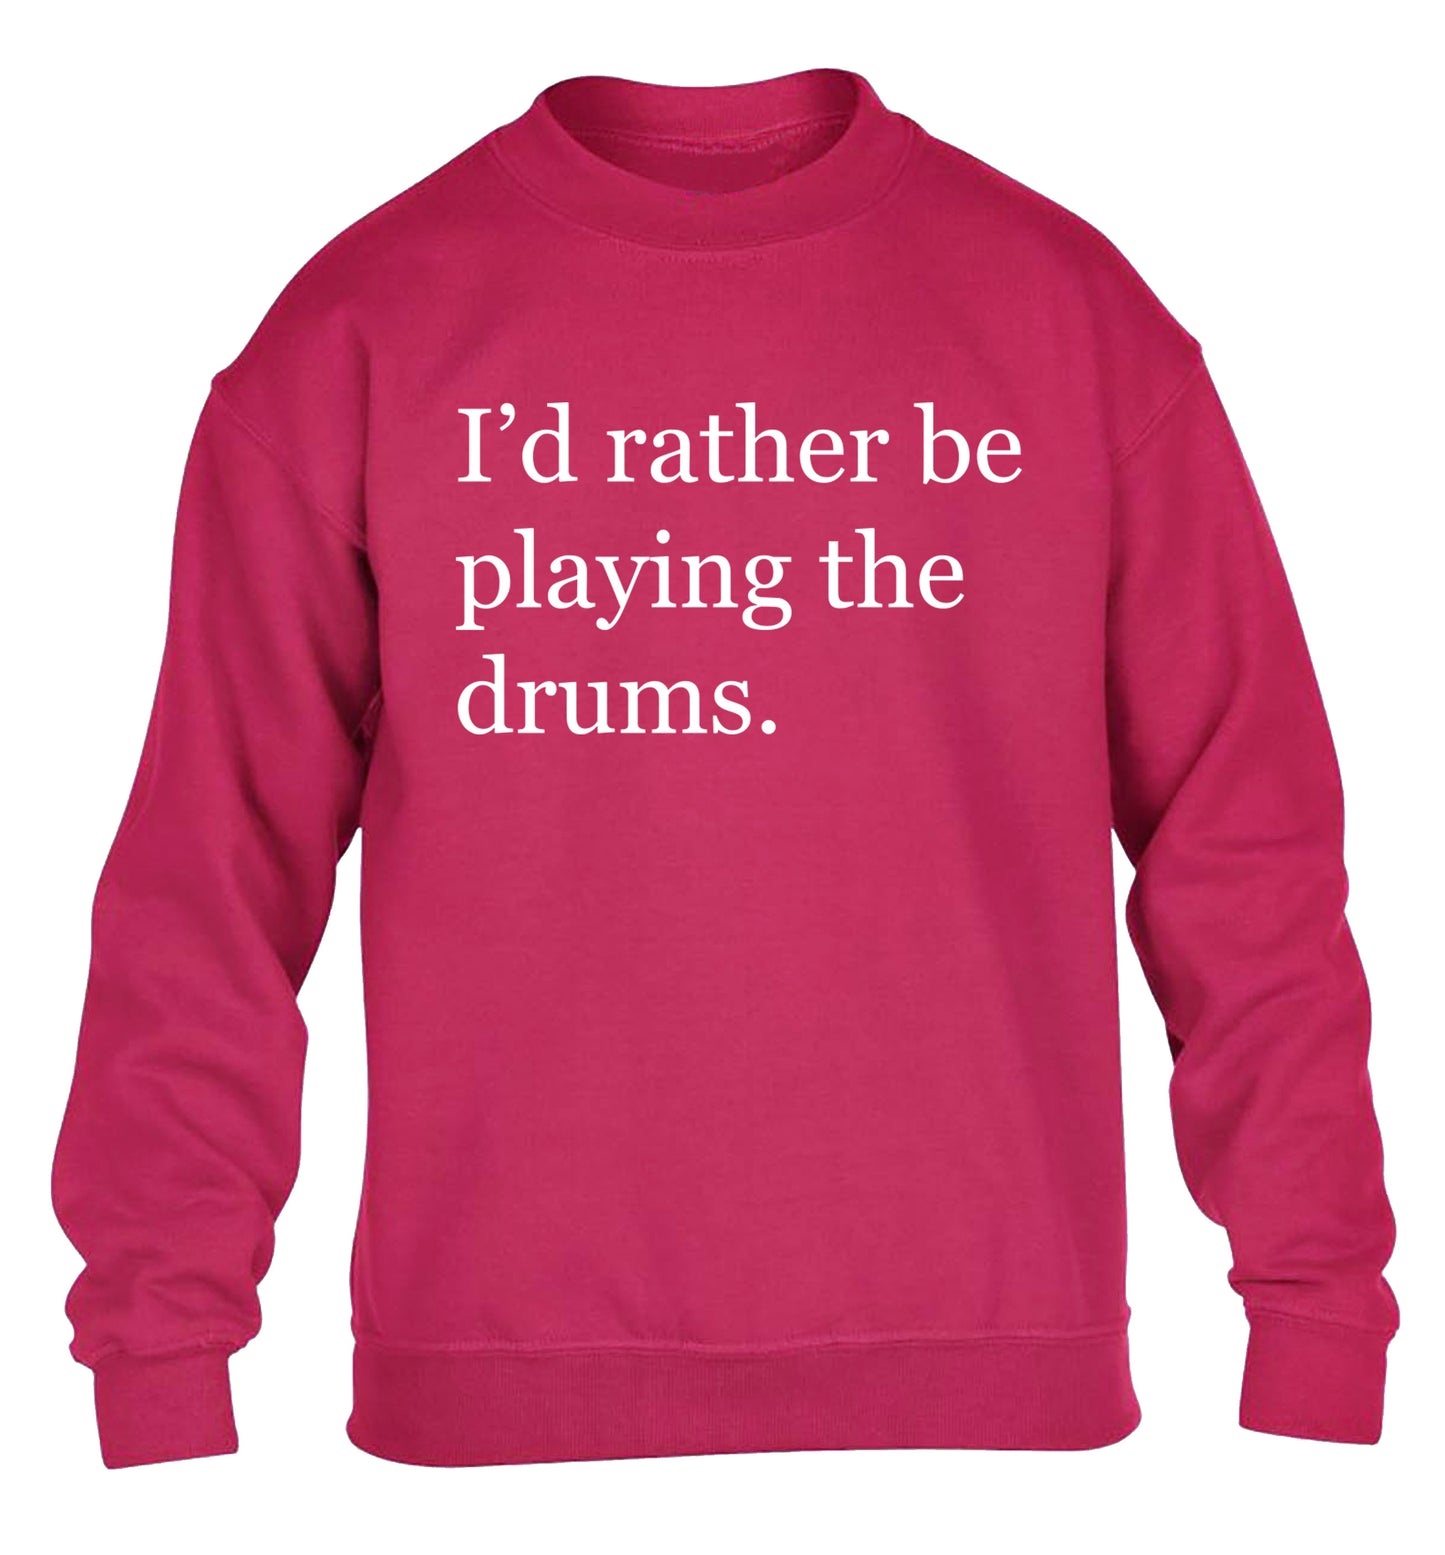 I'd rather be playing the drums children's pink sweater 12-14 Years